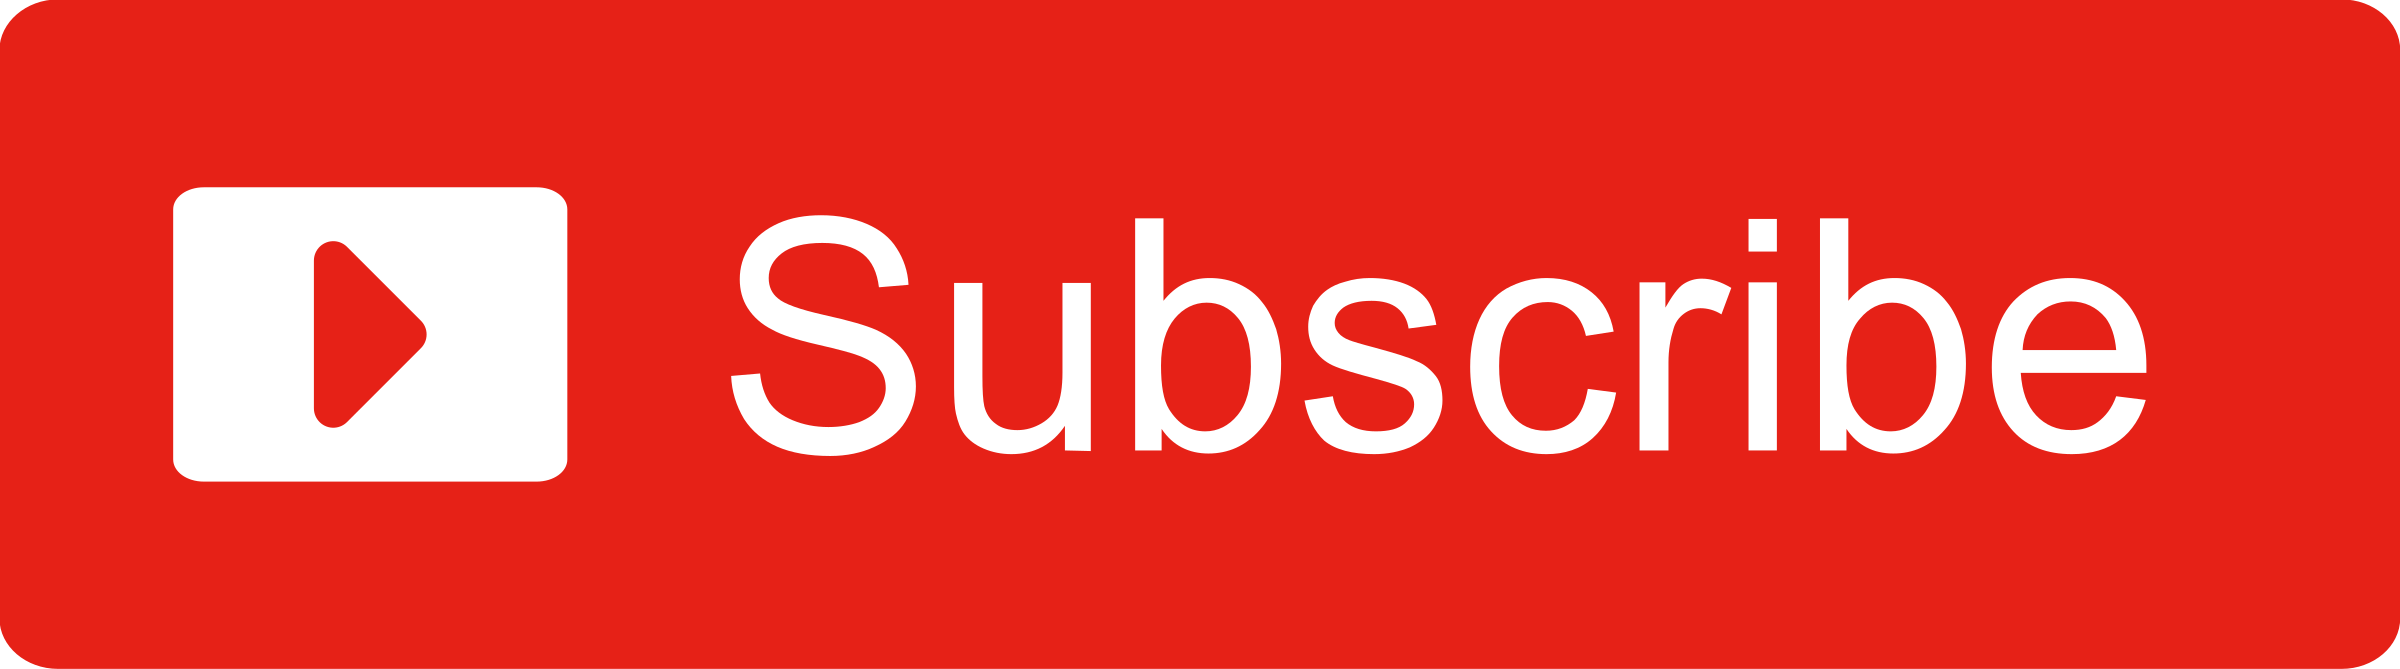 subscribe youtube logo png transparent